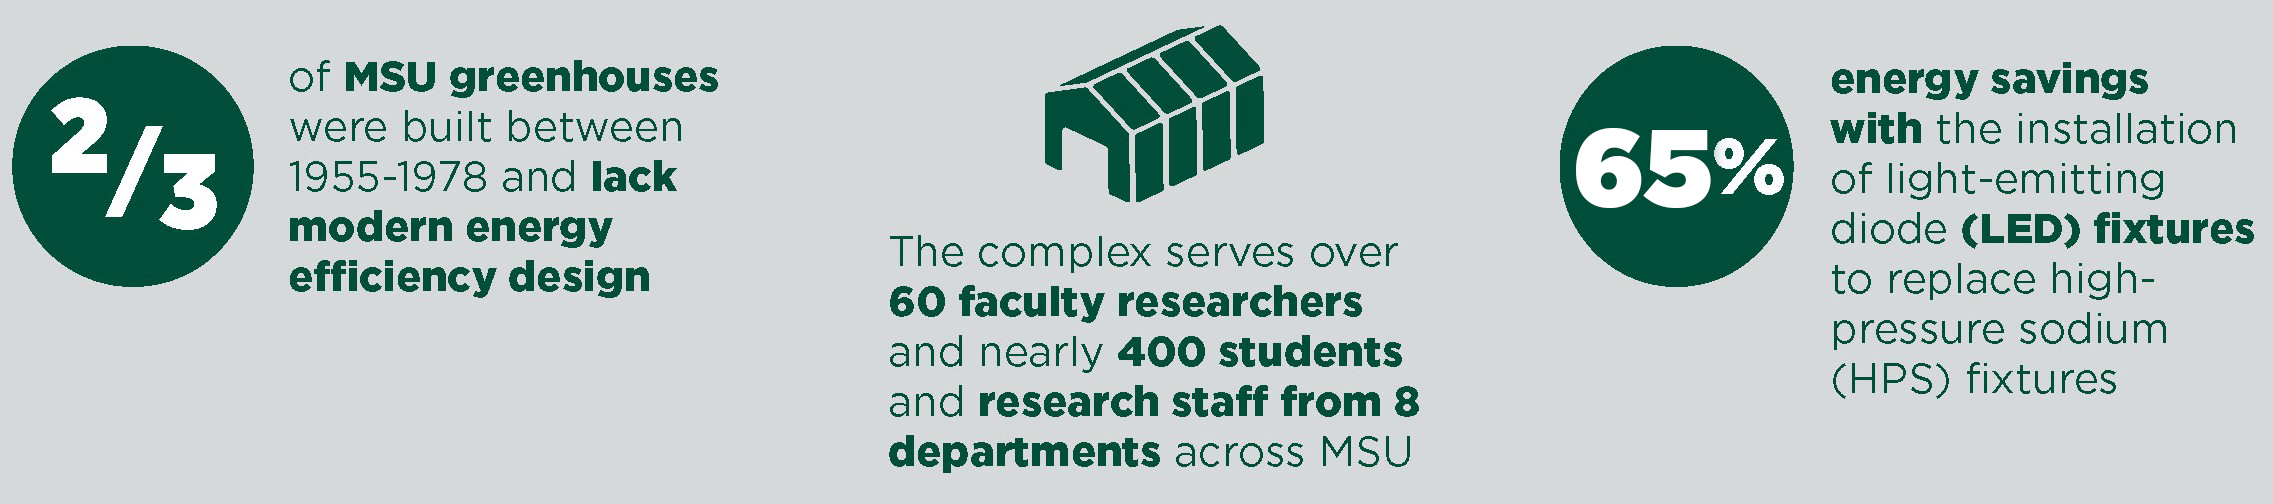 Two-thirds of MSU greenhouses were built between 1955-1978 and lack modern energy efficiency design.